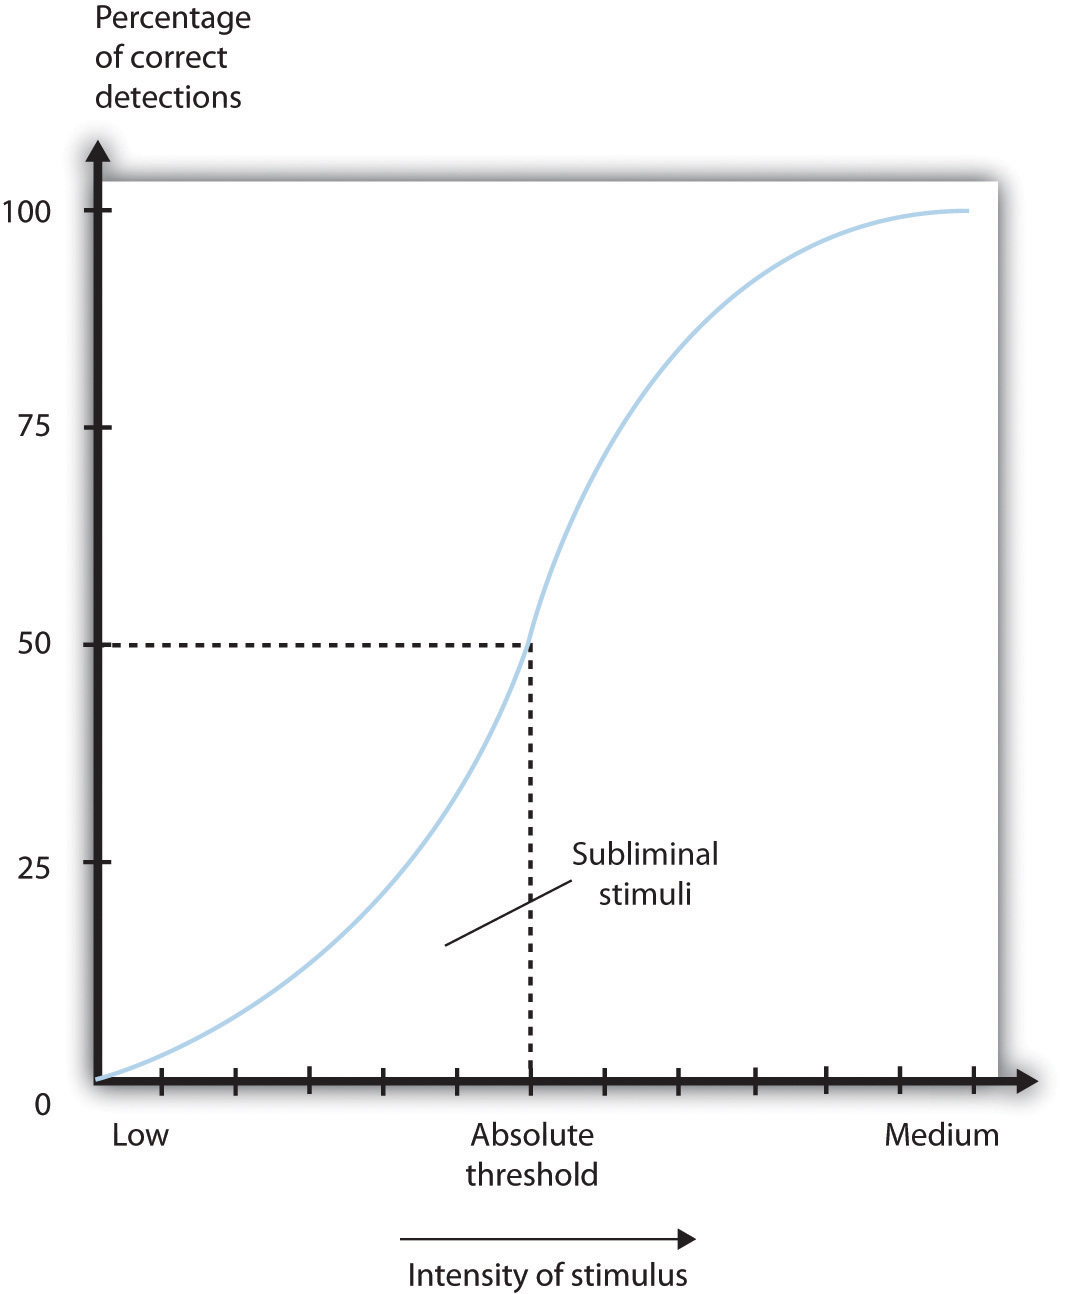 As the intensity of a stimulus increases, we are more likely to perceive it. Stimuli below the absolute threshold can still have at least some influence on us, even though we cannot consciously detect them.